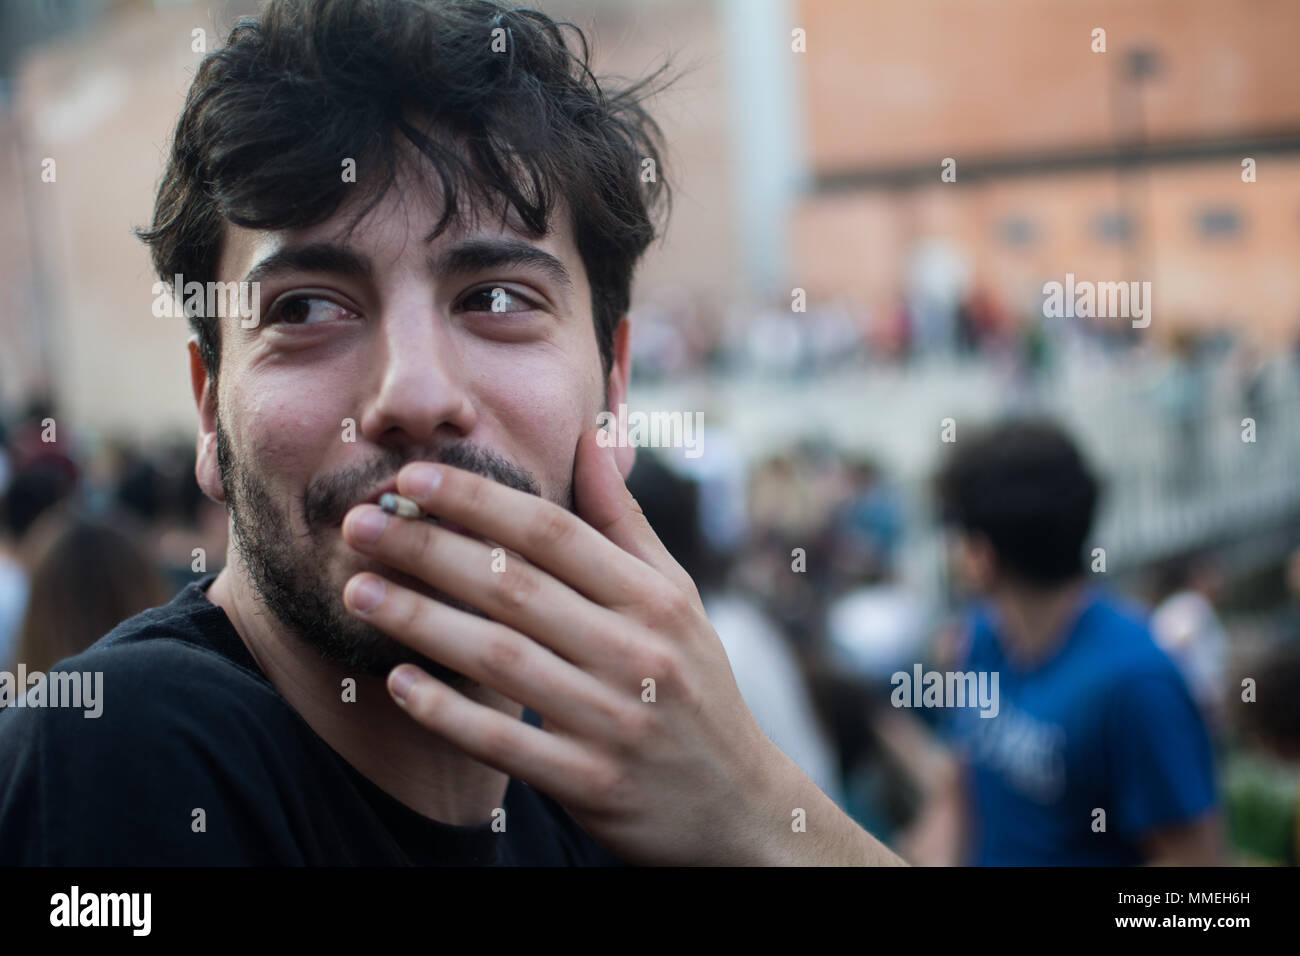 front view of an Italian young man smoking a cigarette or a legal joint, marijuana or tobacco Stock Photo